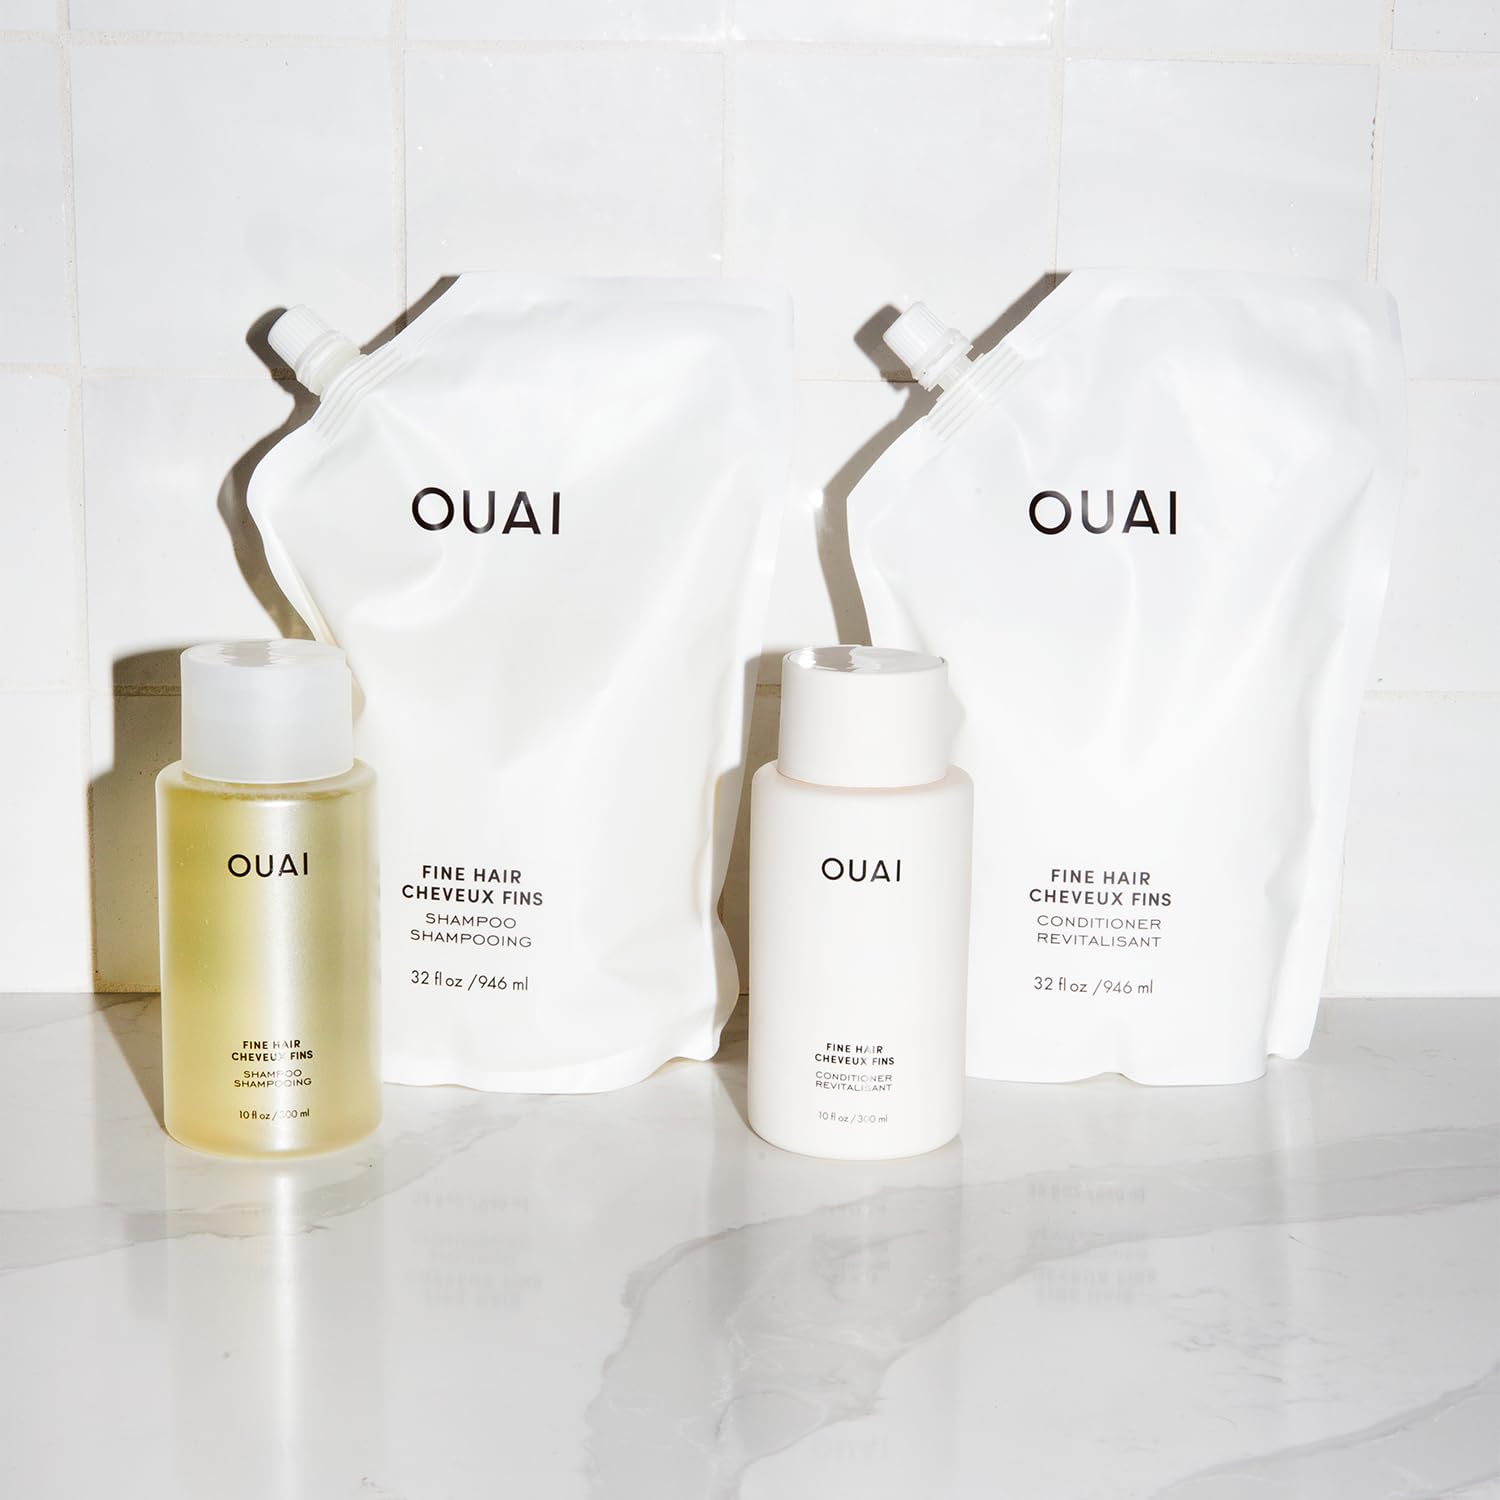 OUAI Fine Hair Conditioner-Volumizing Conditioner for Fine Hair Made with Keratin, Biotin and Chia Seed Oil - Adds Softness, Bounce and Volume - Free from Parabens, Sulfates, and Phthalates (10 oz) : Beauty & Personal Care